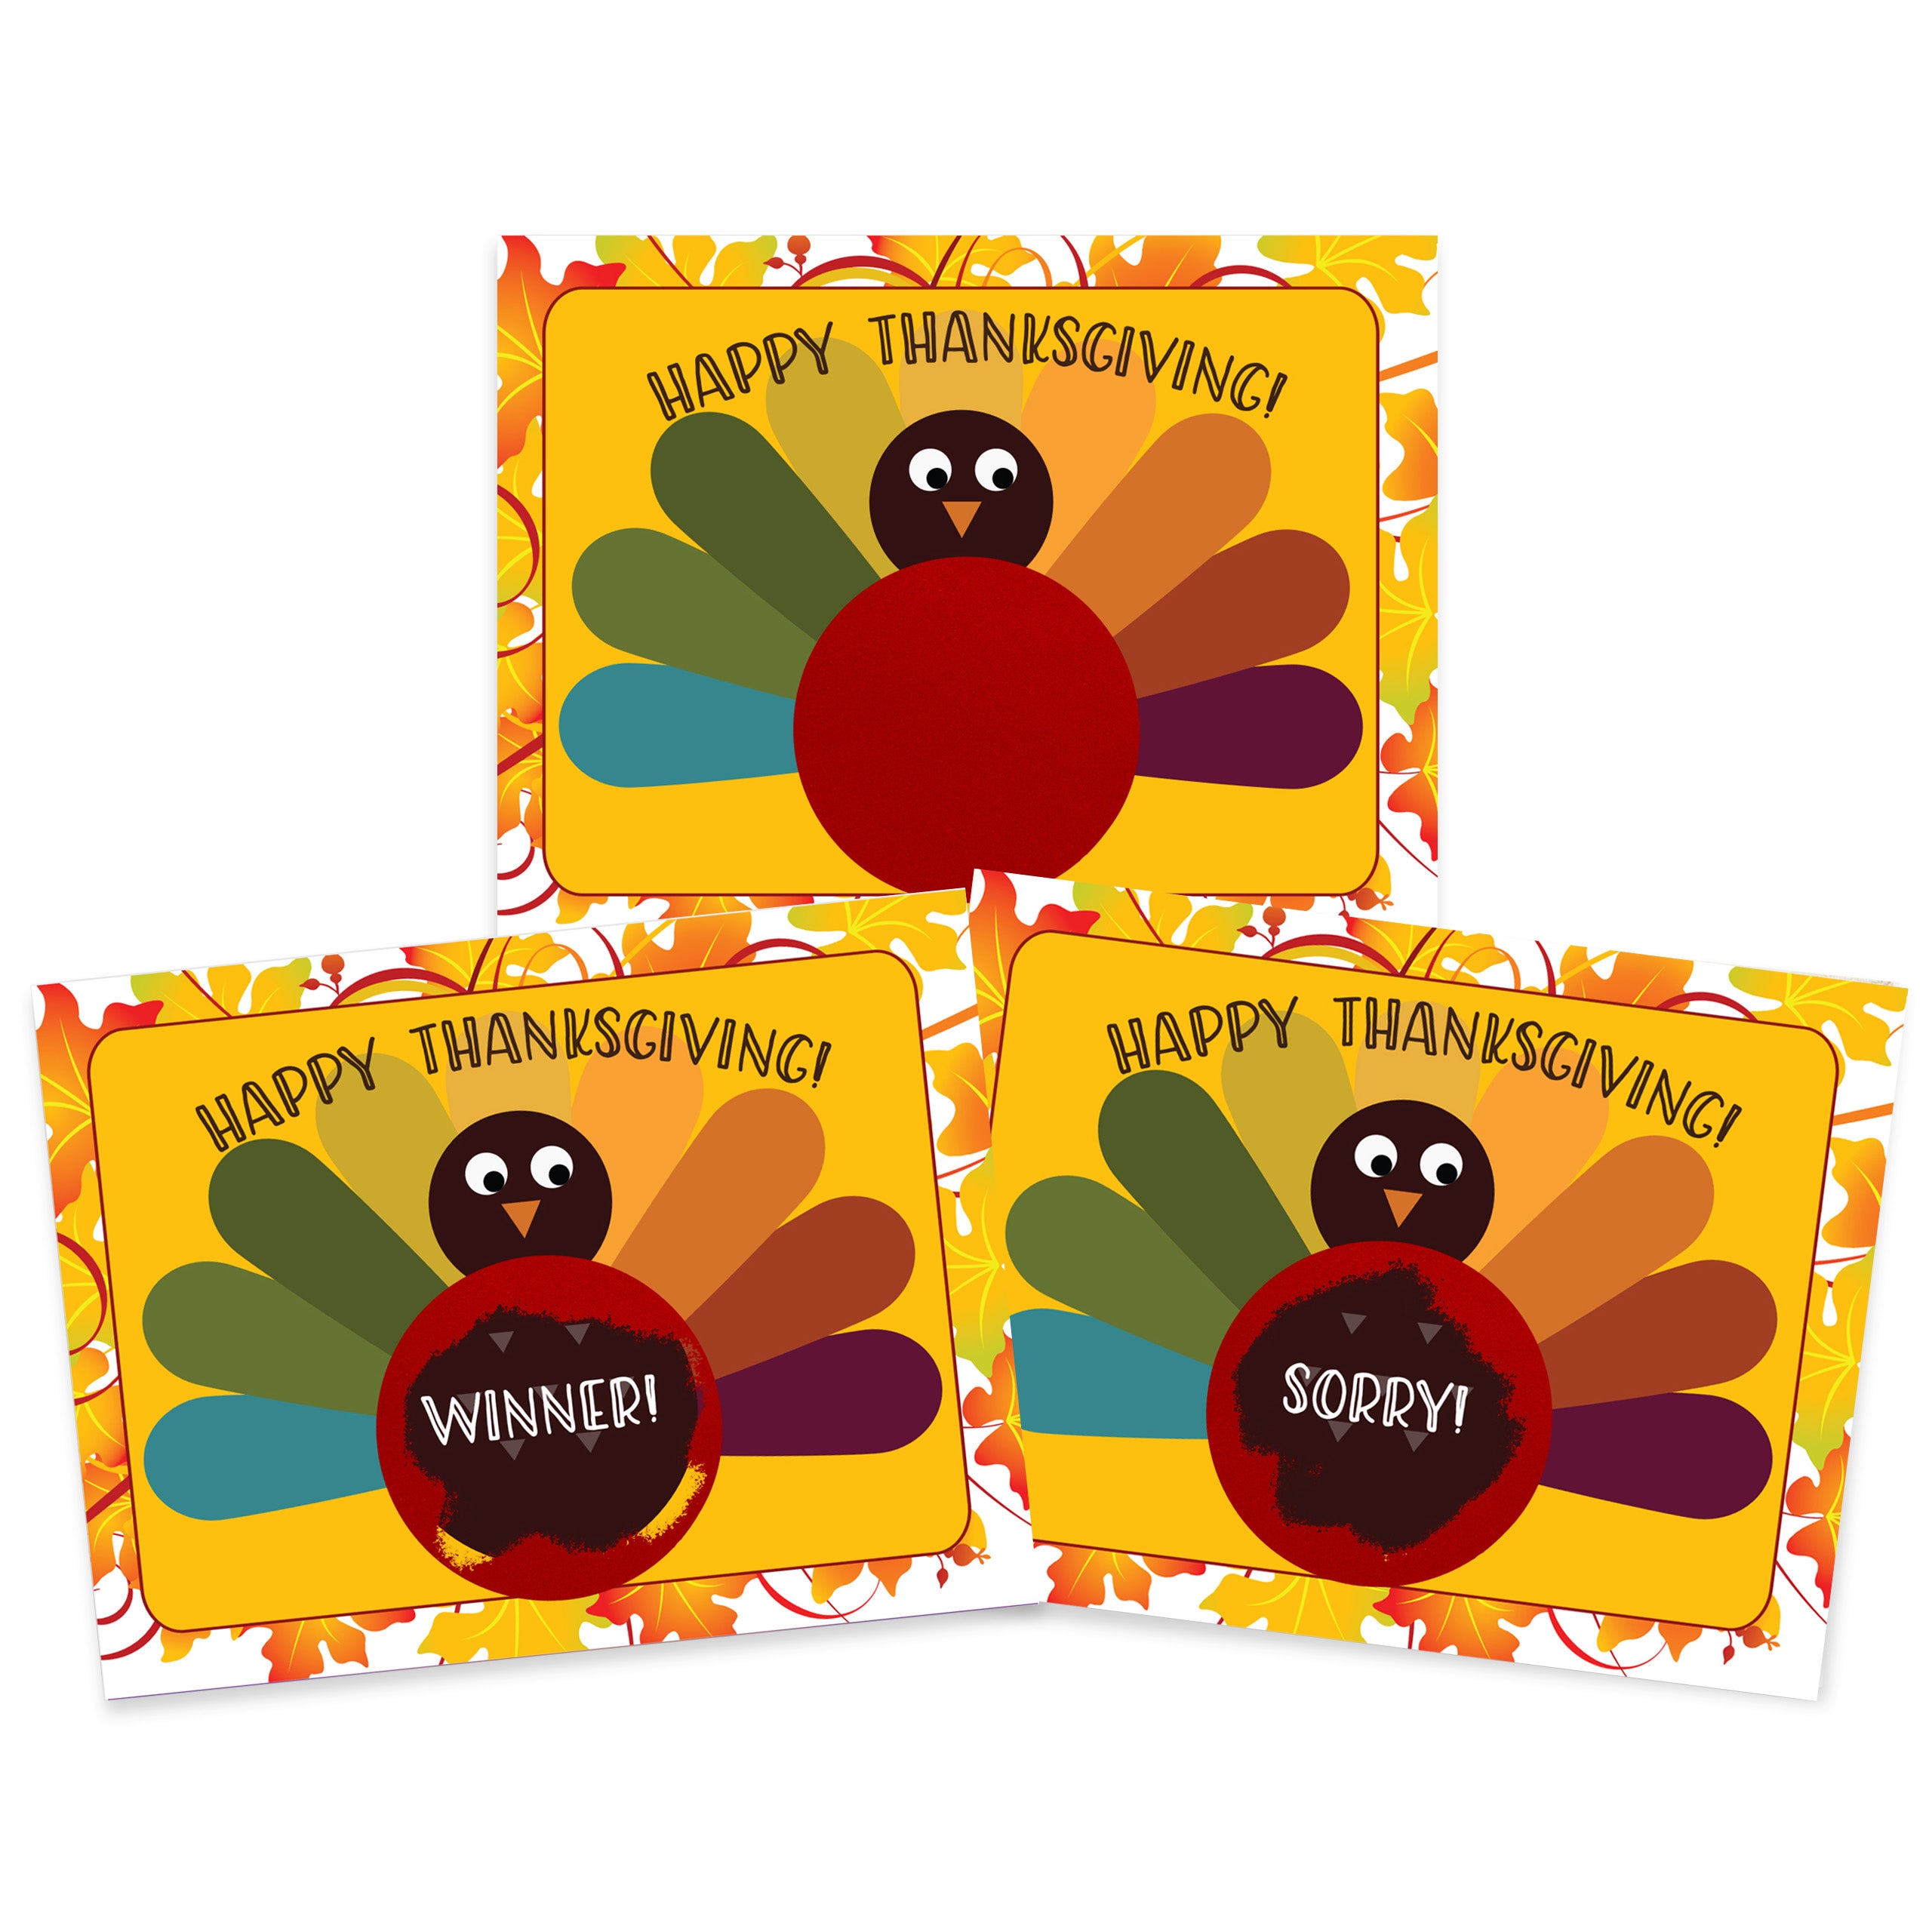 Thanksgiving Turkey Scratch Off Game 26 Pack - 2 Winning and 24 Non-Winning Cards - My Scratch Offs